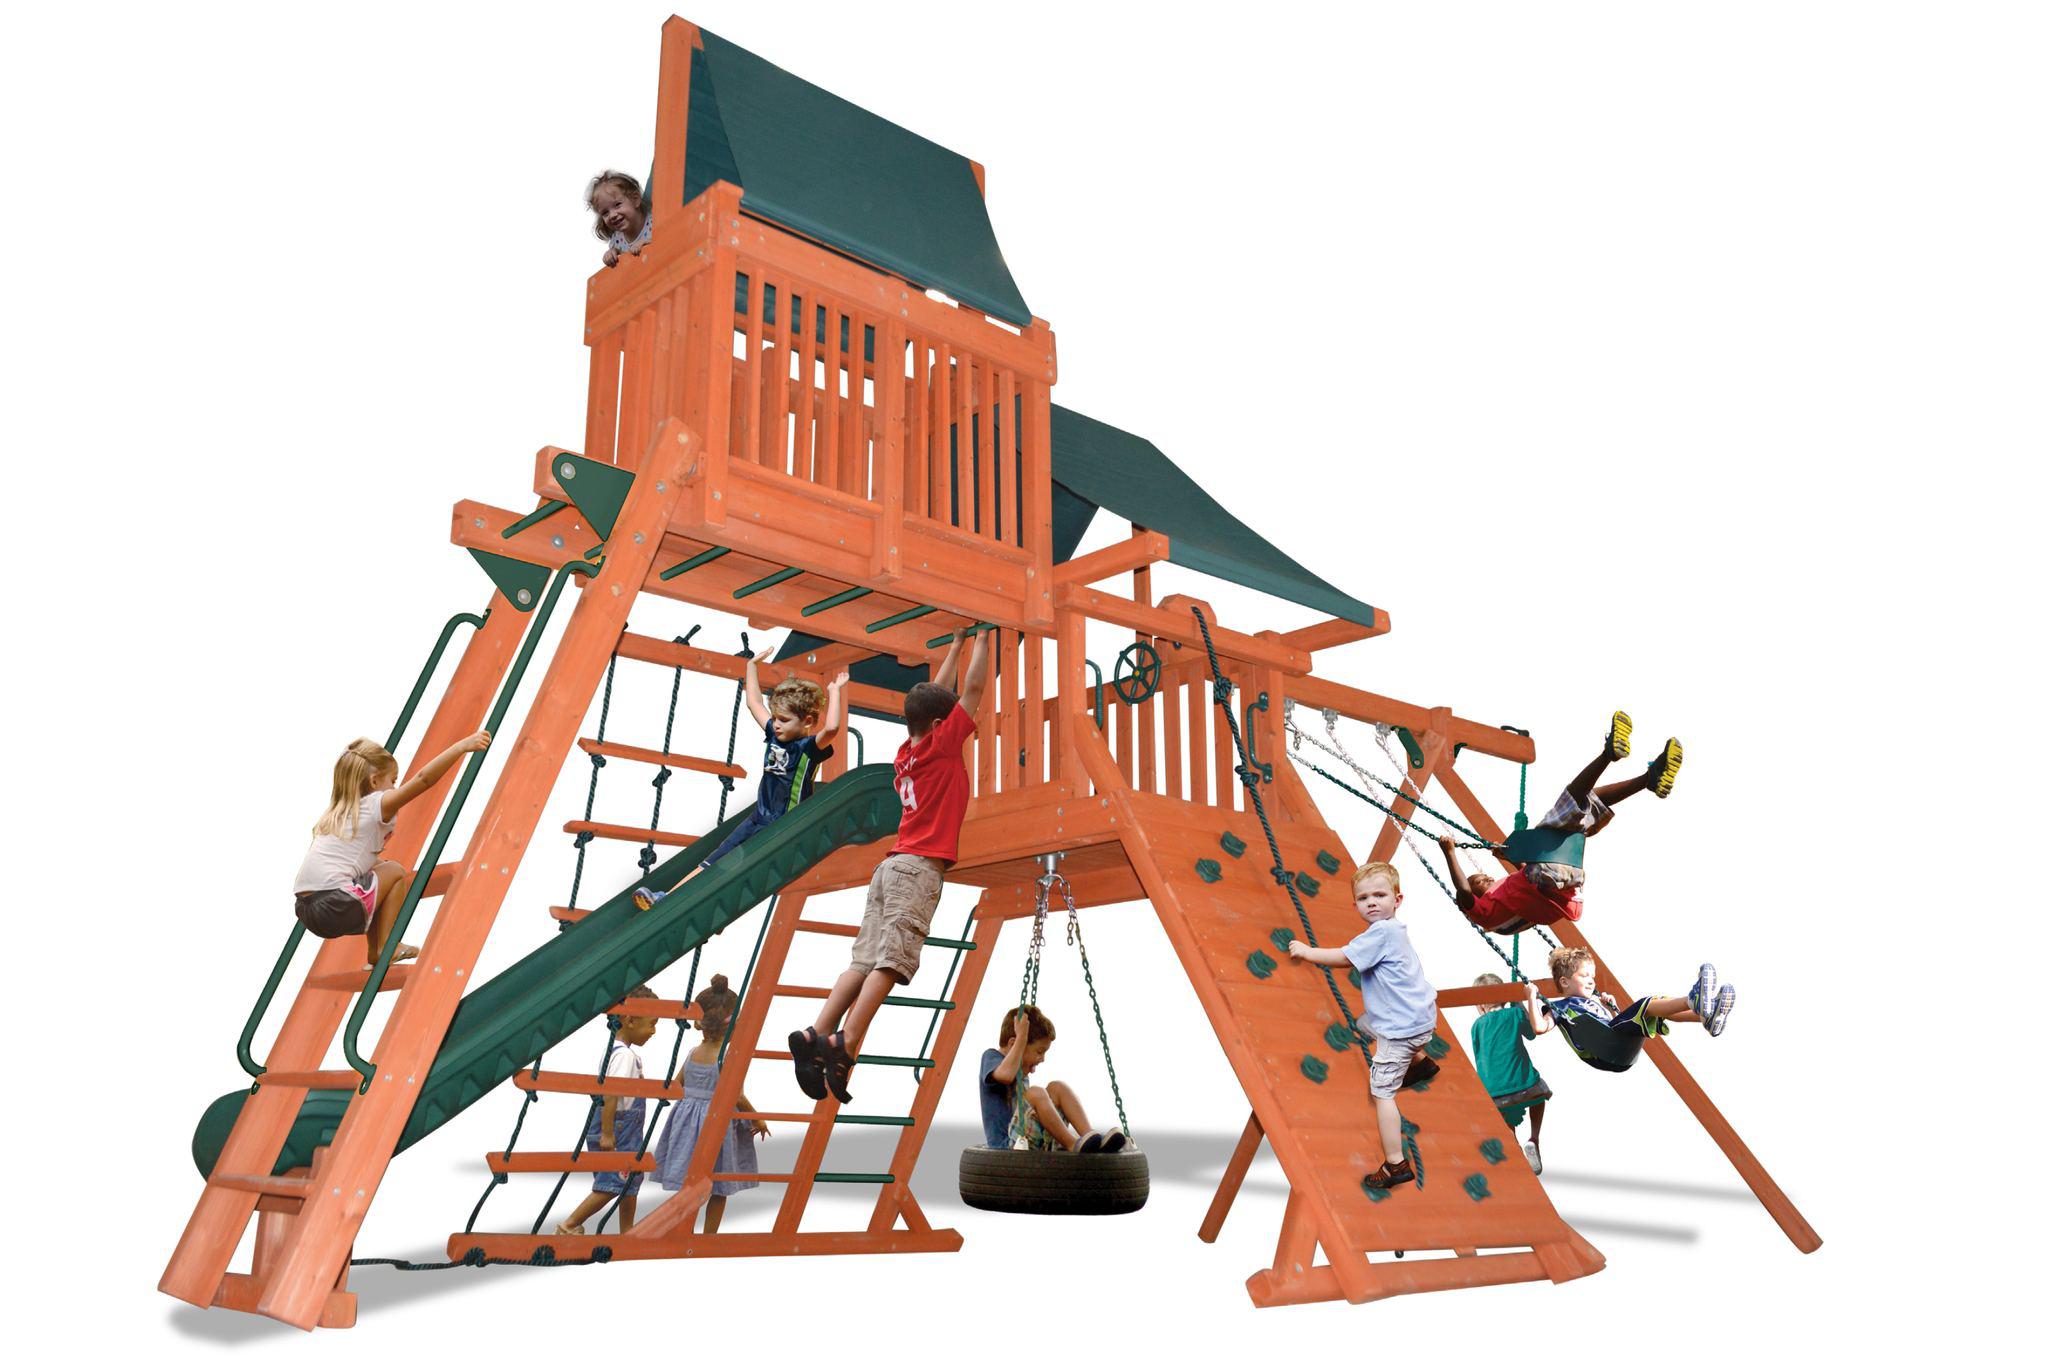 The Playground One Turbo Original Playcenter Combo 4 is the definition of a complete activity center Happy Backyards Collierville (901)888-3523